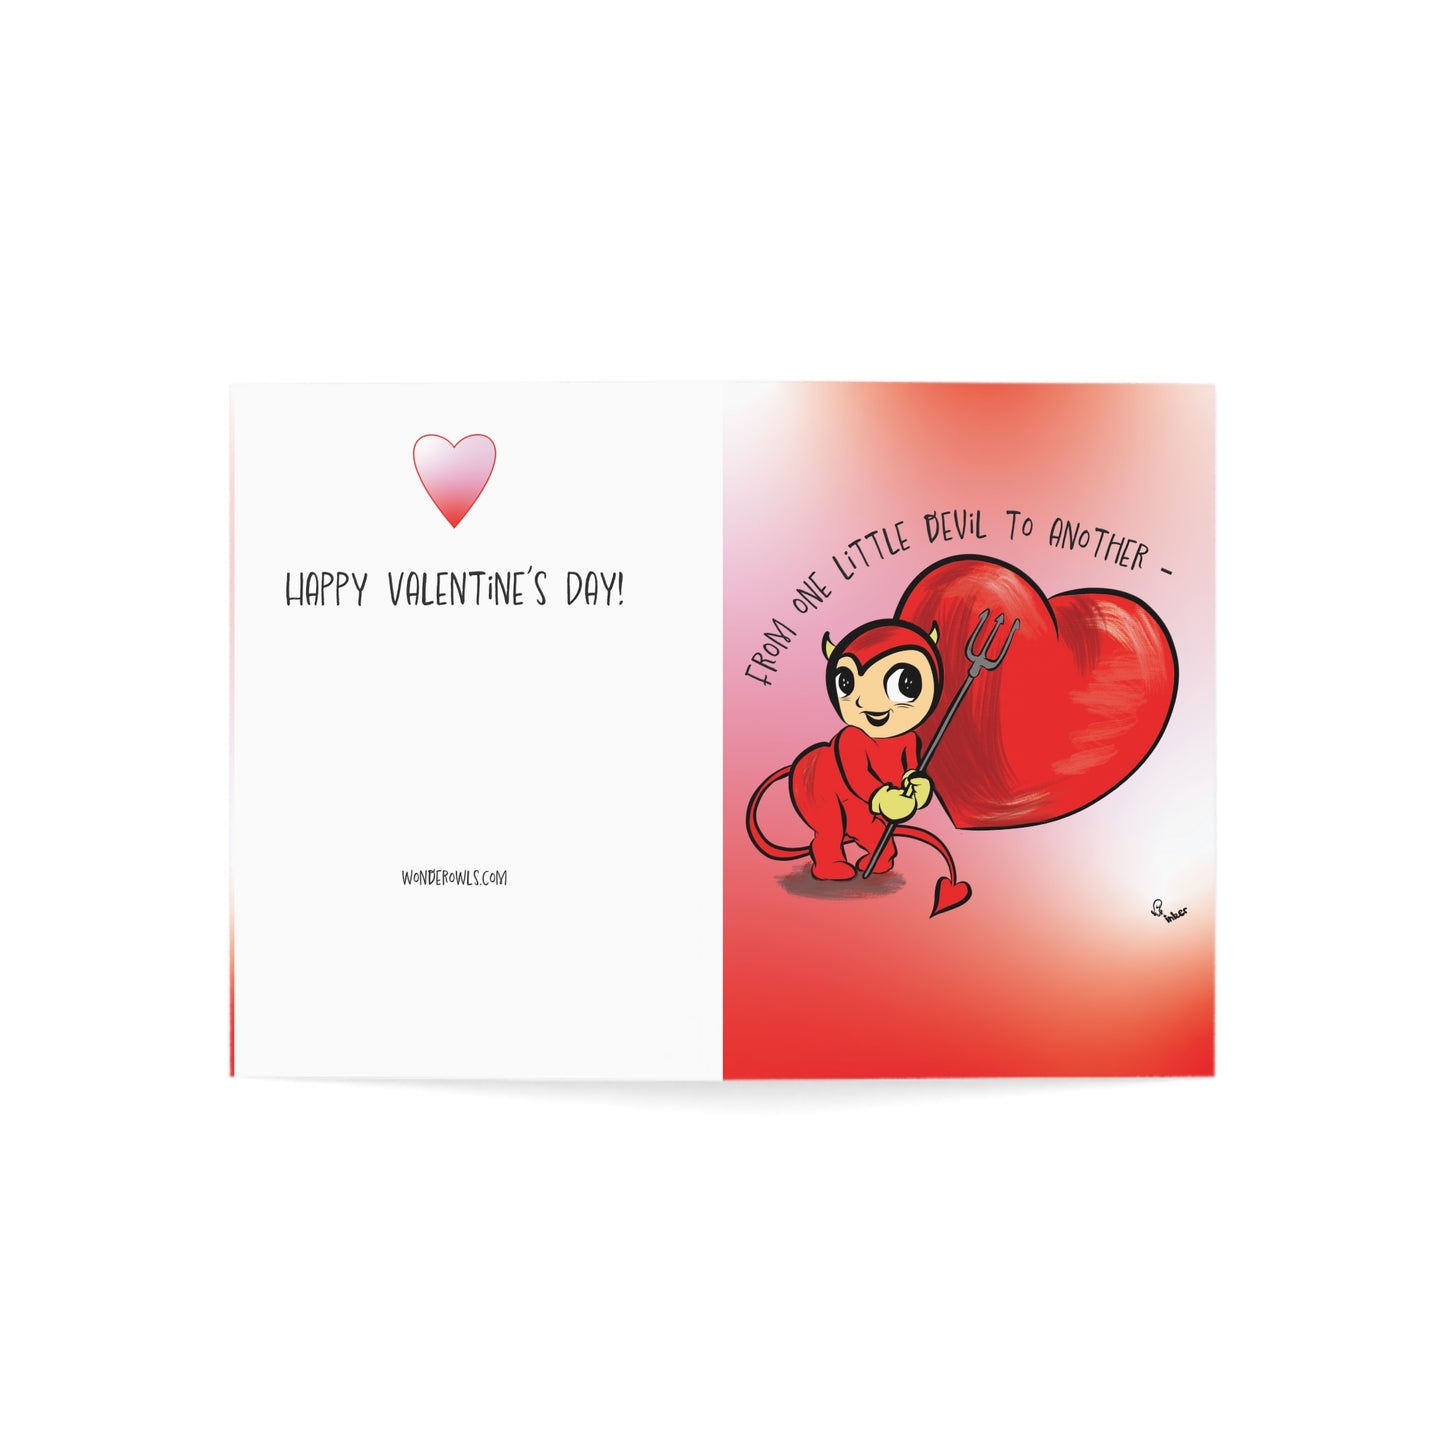 Valentines Day Greeting Cards From One Little Devil to Another (1, 10, 30, and 50pcs)